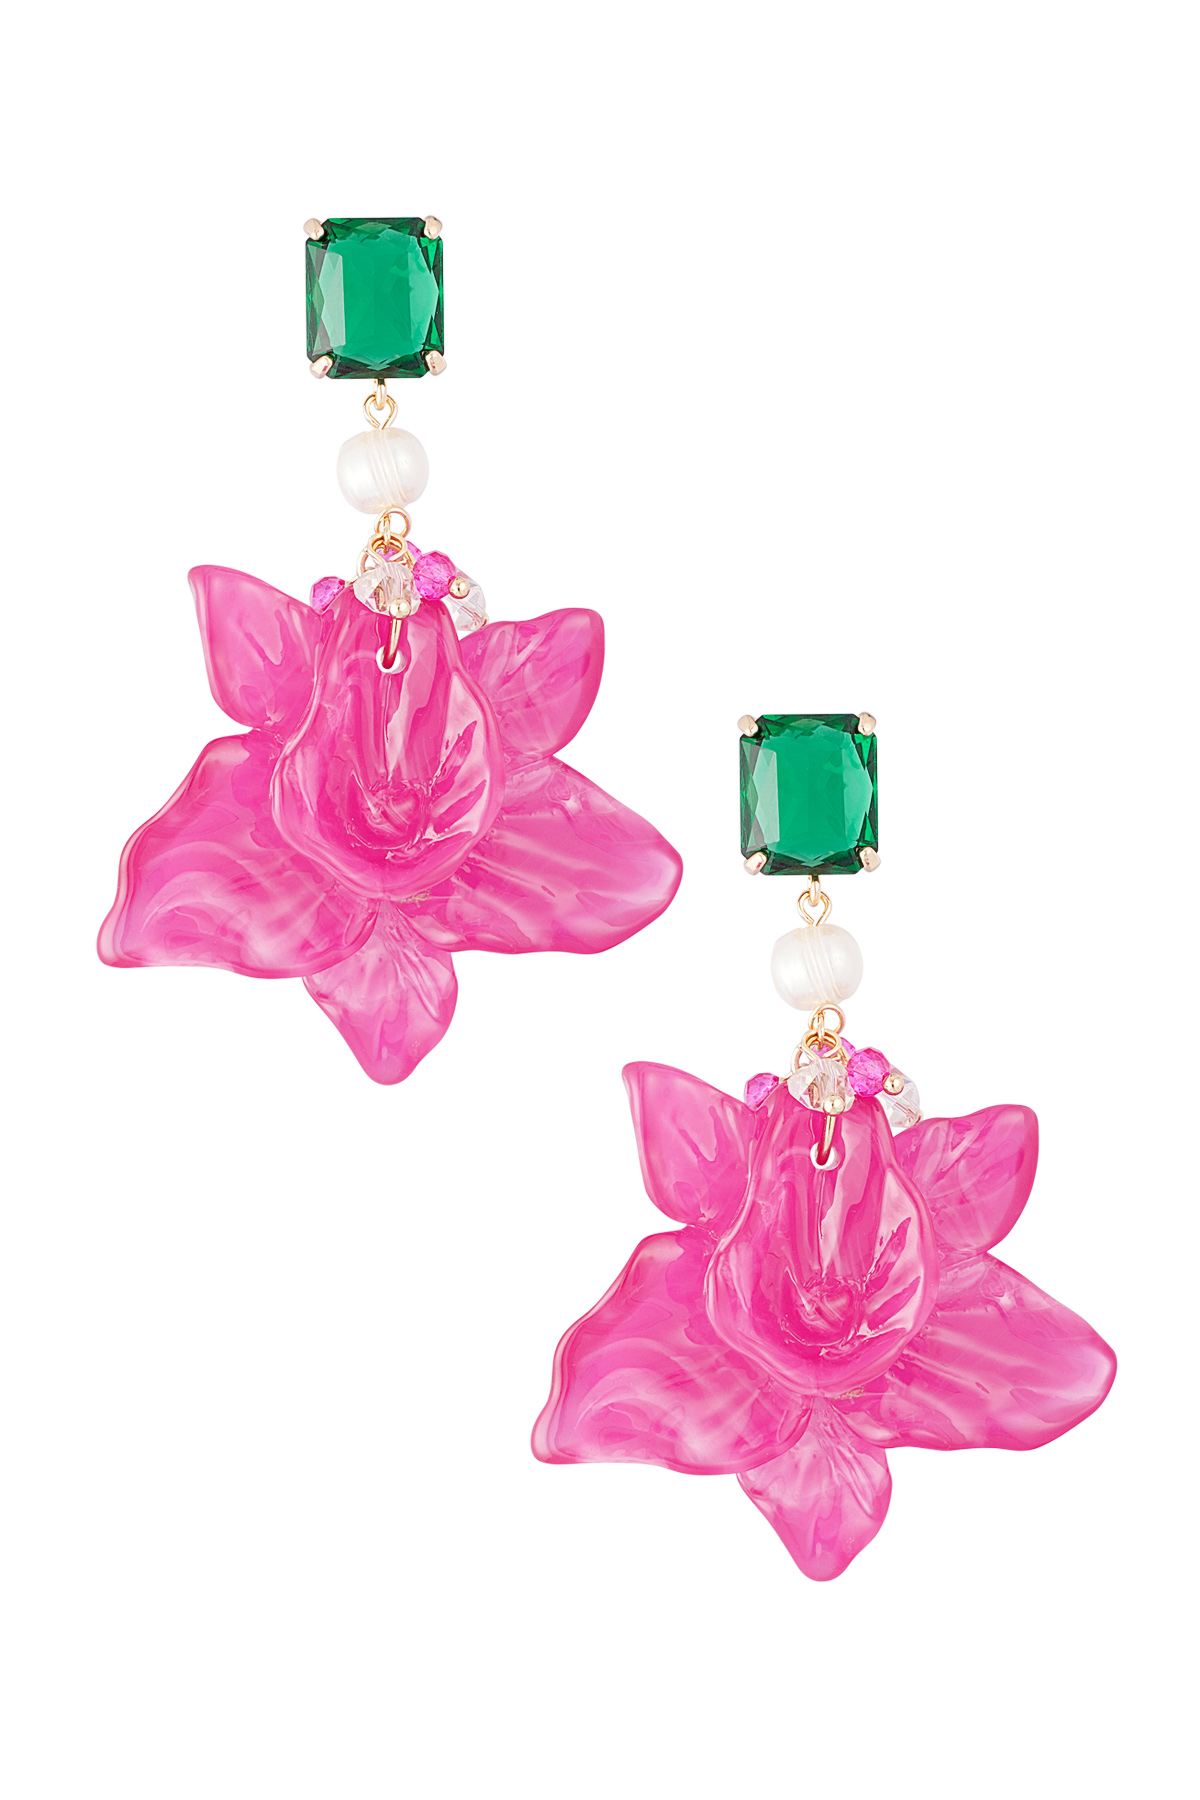 Floral pearl party earrings - fuchsia 